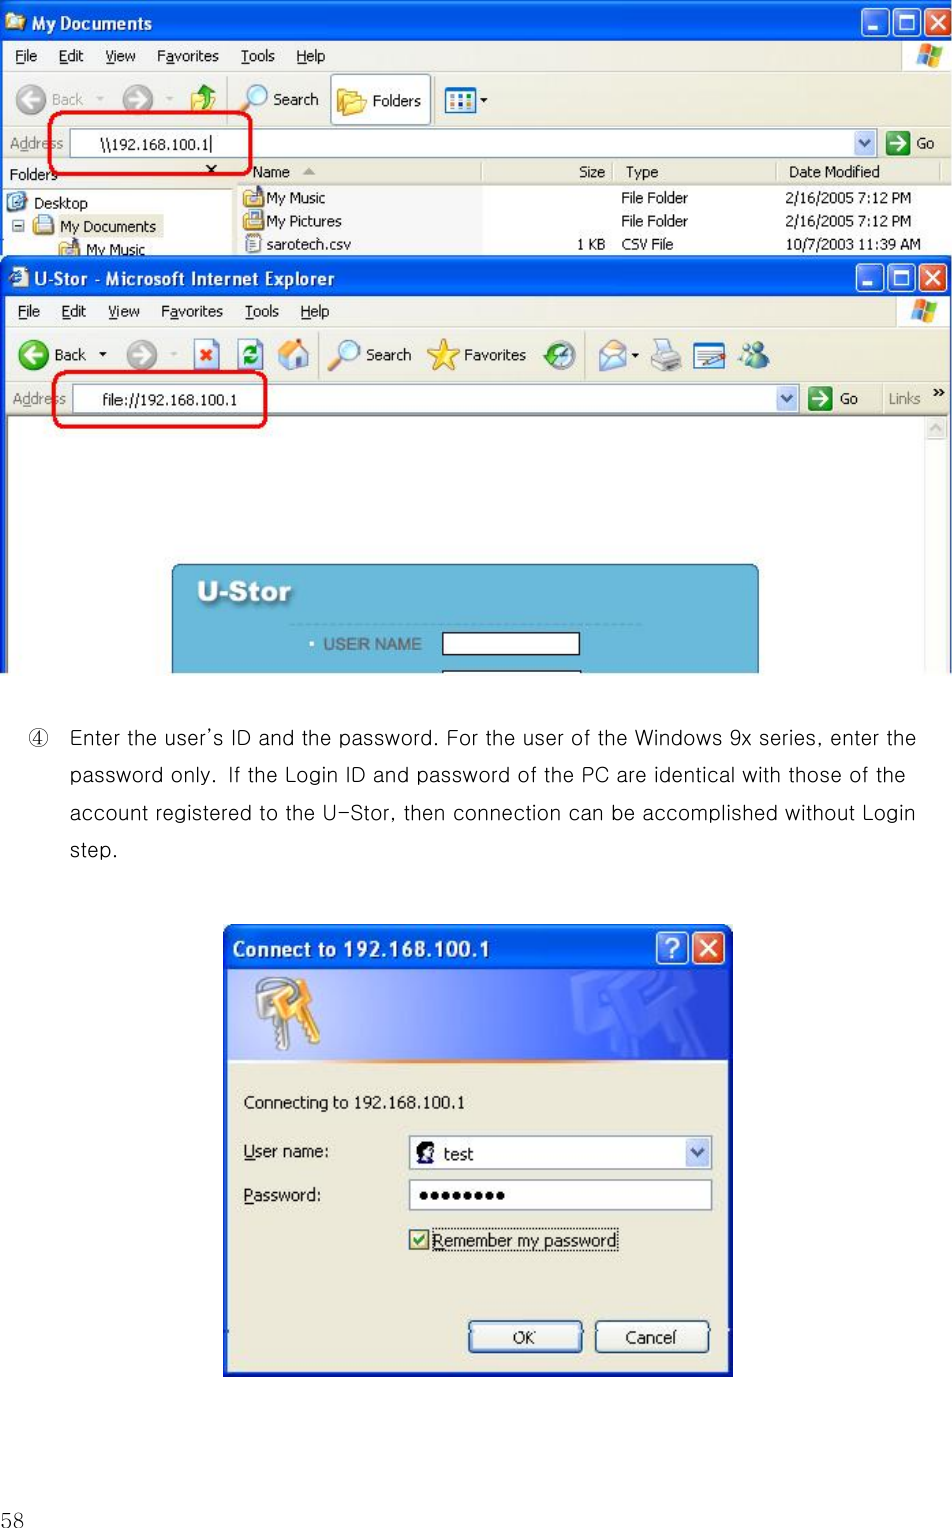 58   ④  Enter the user’s ID and the password. For the user of the Windows 9x series, enter the password only. If the Login ID and password of the PC are identical with those of the account registered to the U-Stor, then connection can be accomplished without Login step.  